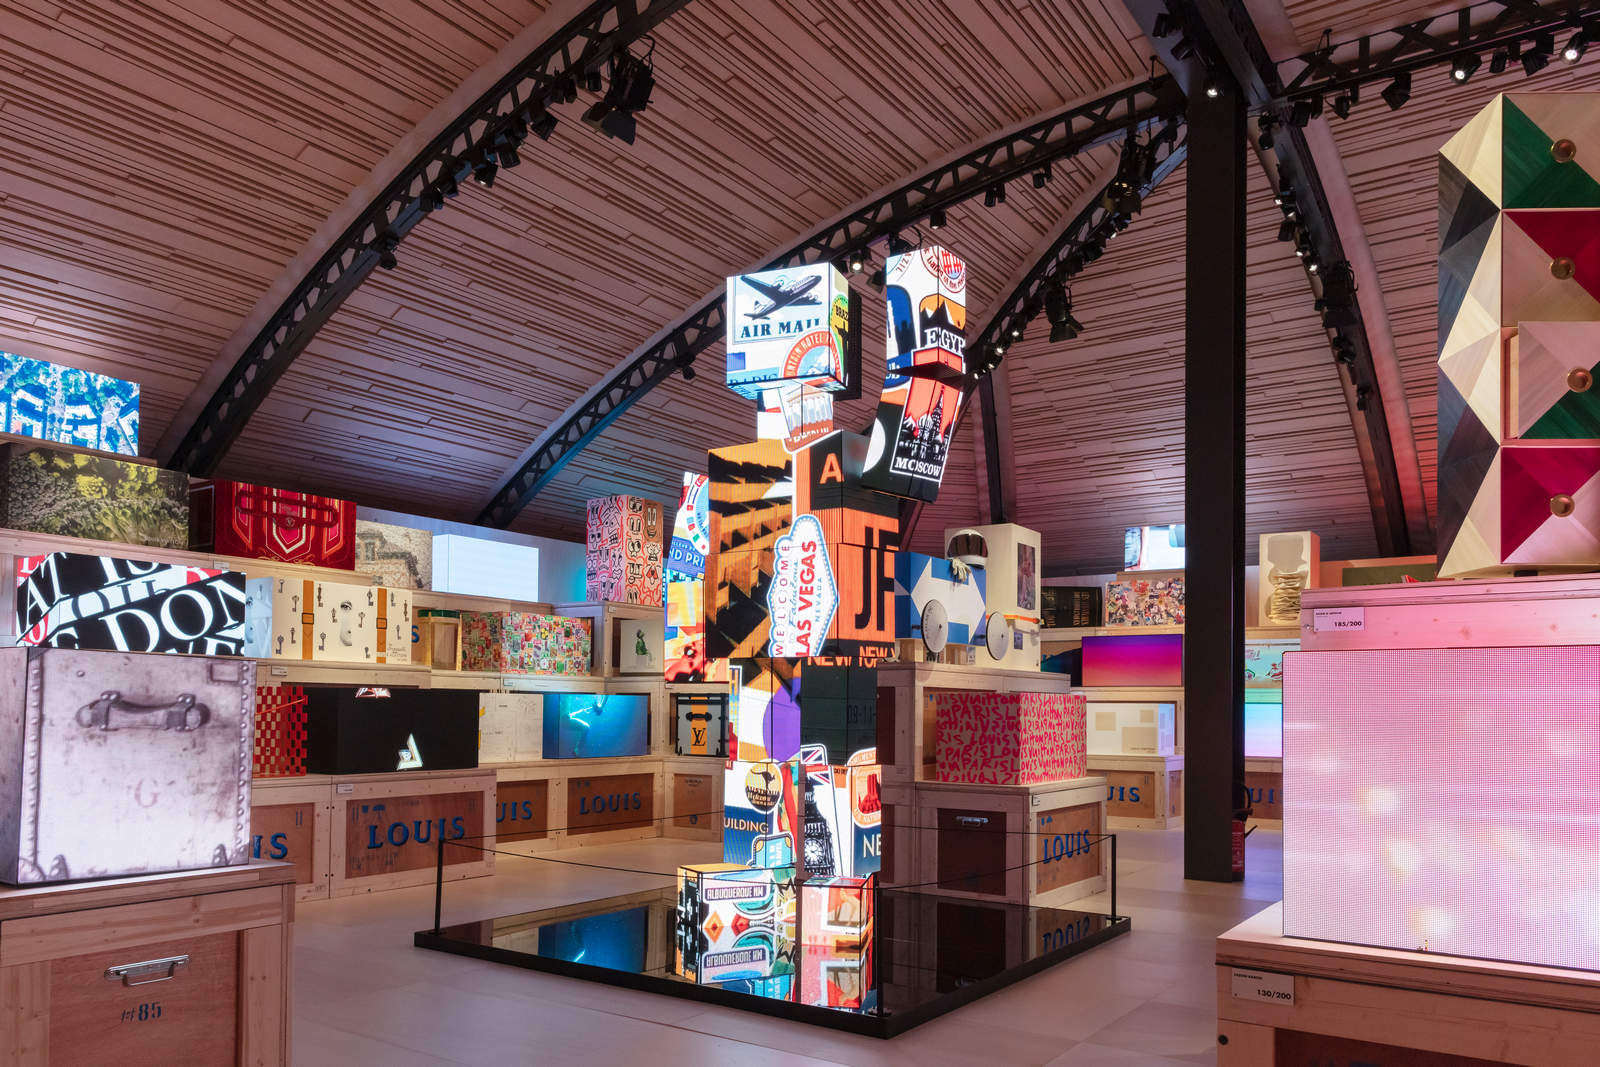 Inside Louis Vuitton's 200 Trunks, 200 Visionaries: The Exhibition